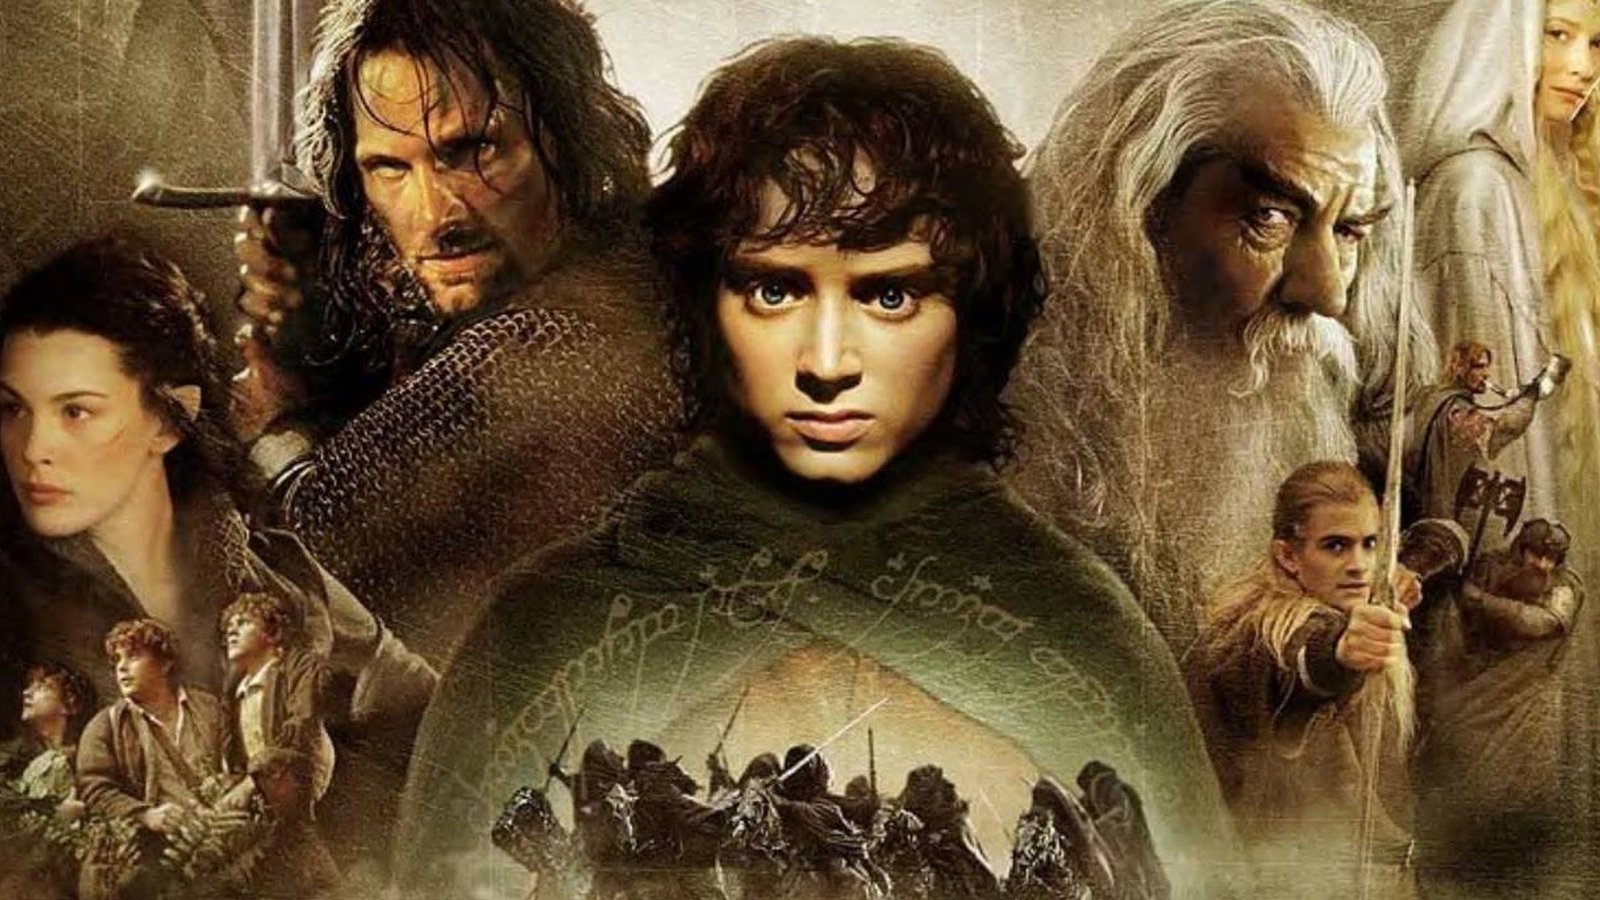  / The Lord of the Rings: The Fellowship of the Ring